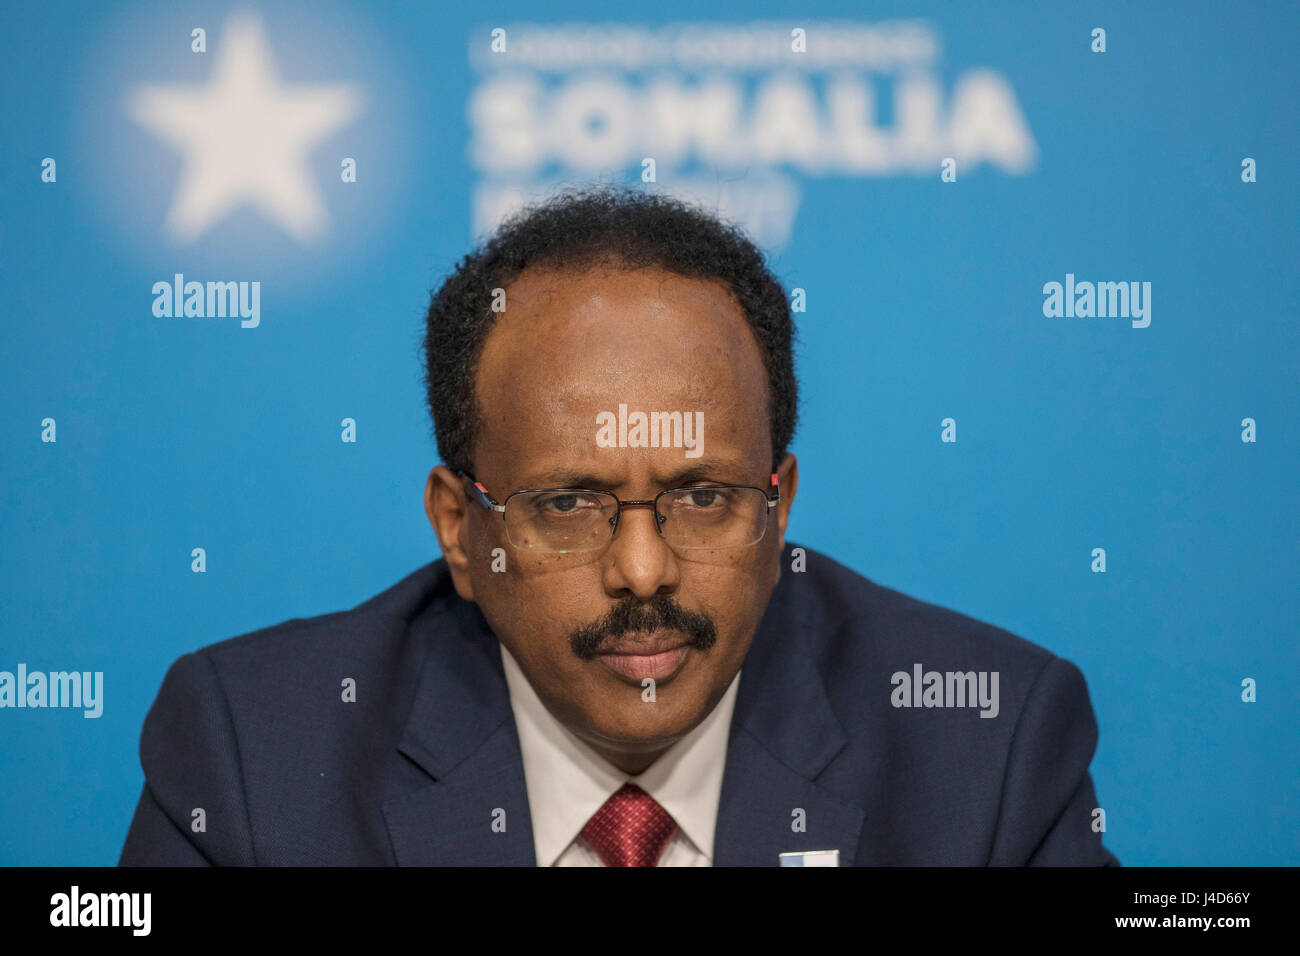 Mohamed Abdullahi Mohamed, President of Somalia at the 2017 Somalia Conference at Lancaster House in central London, which is aimed at improving stability and prosperity in Somalia and boosting the humanitarian response to the drought. Stock Photo